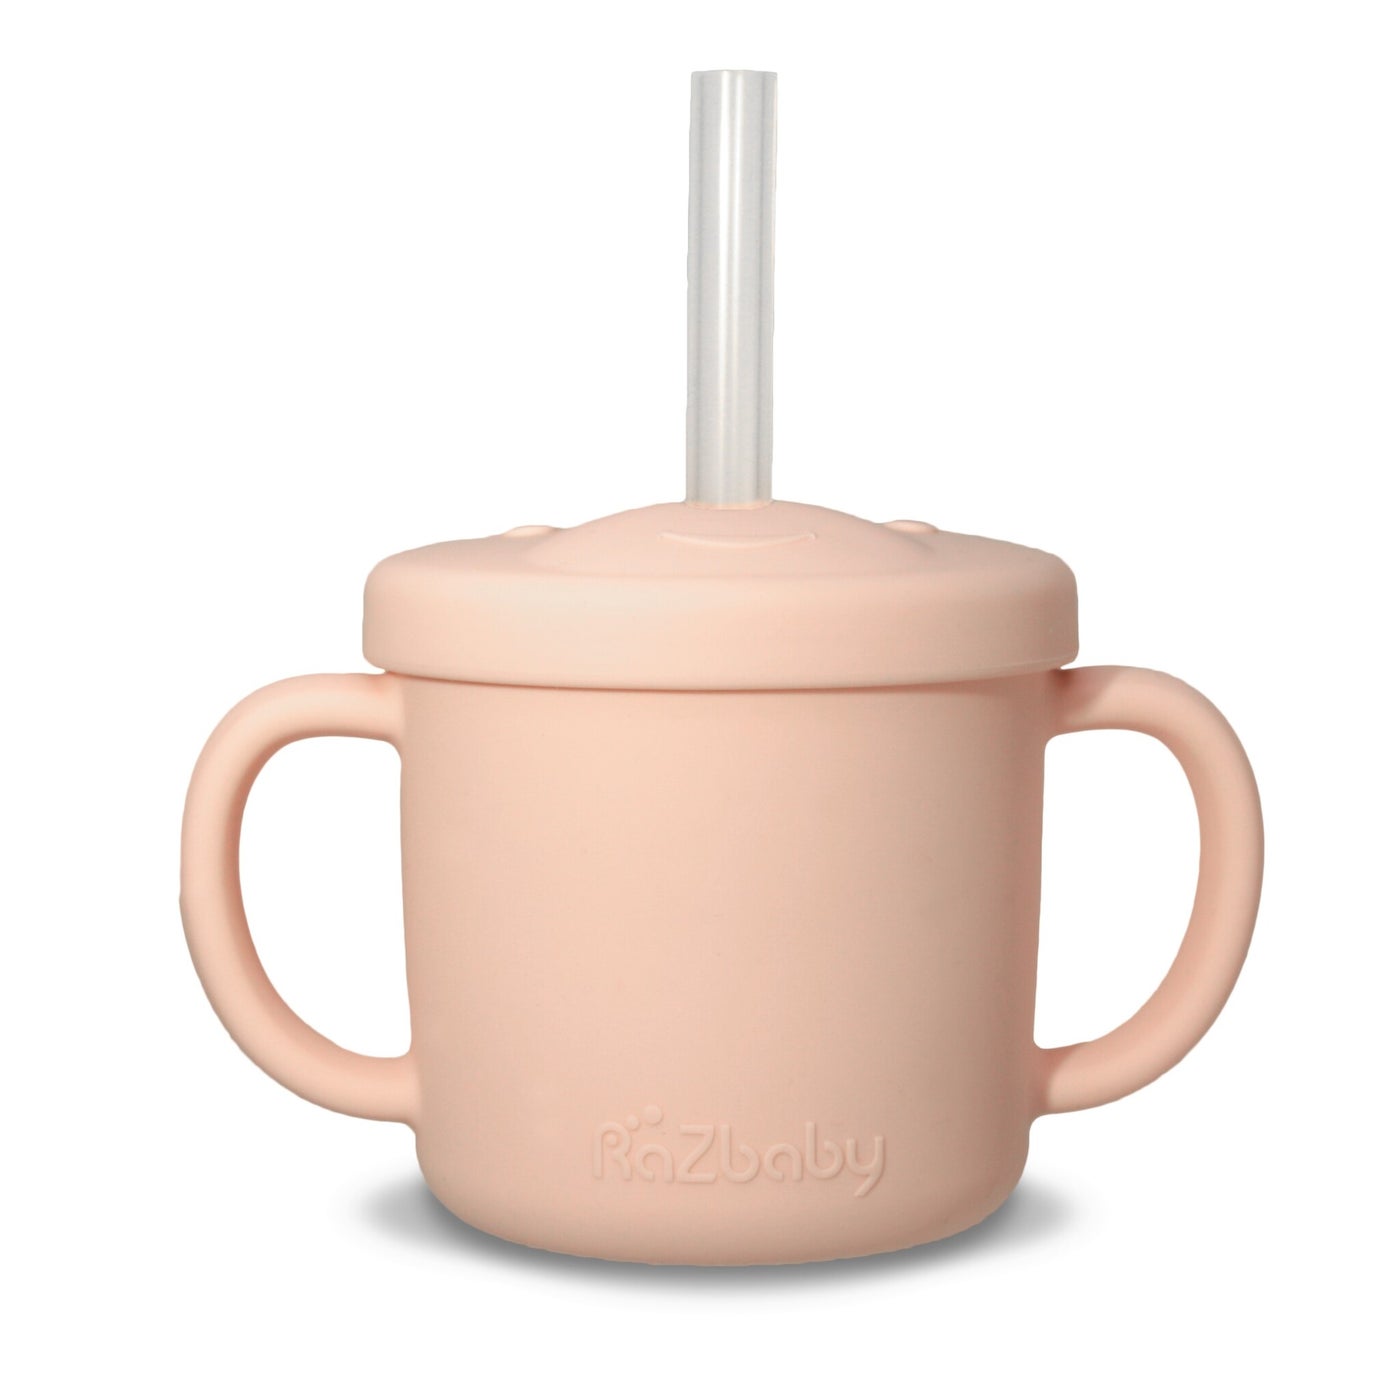 Oso-Cup Silicone Cup & Straw | Cotton Candy